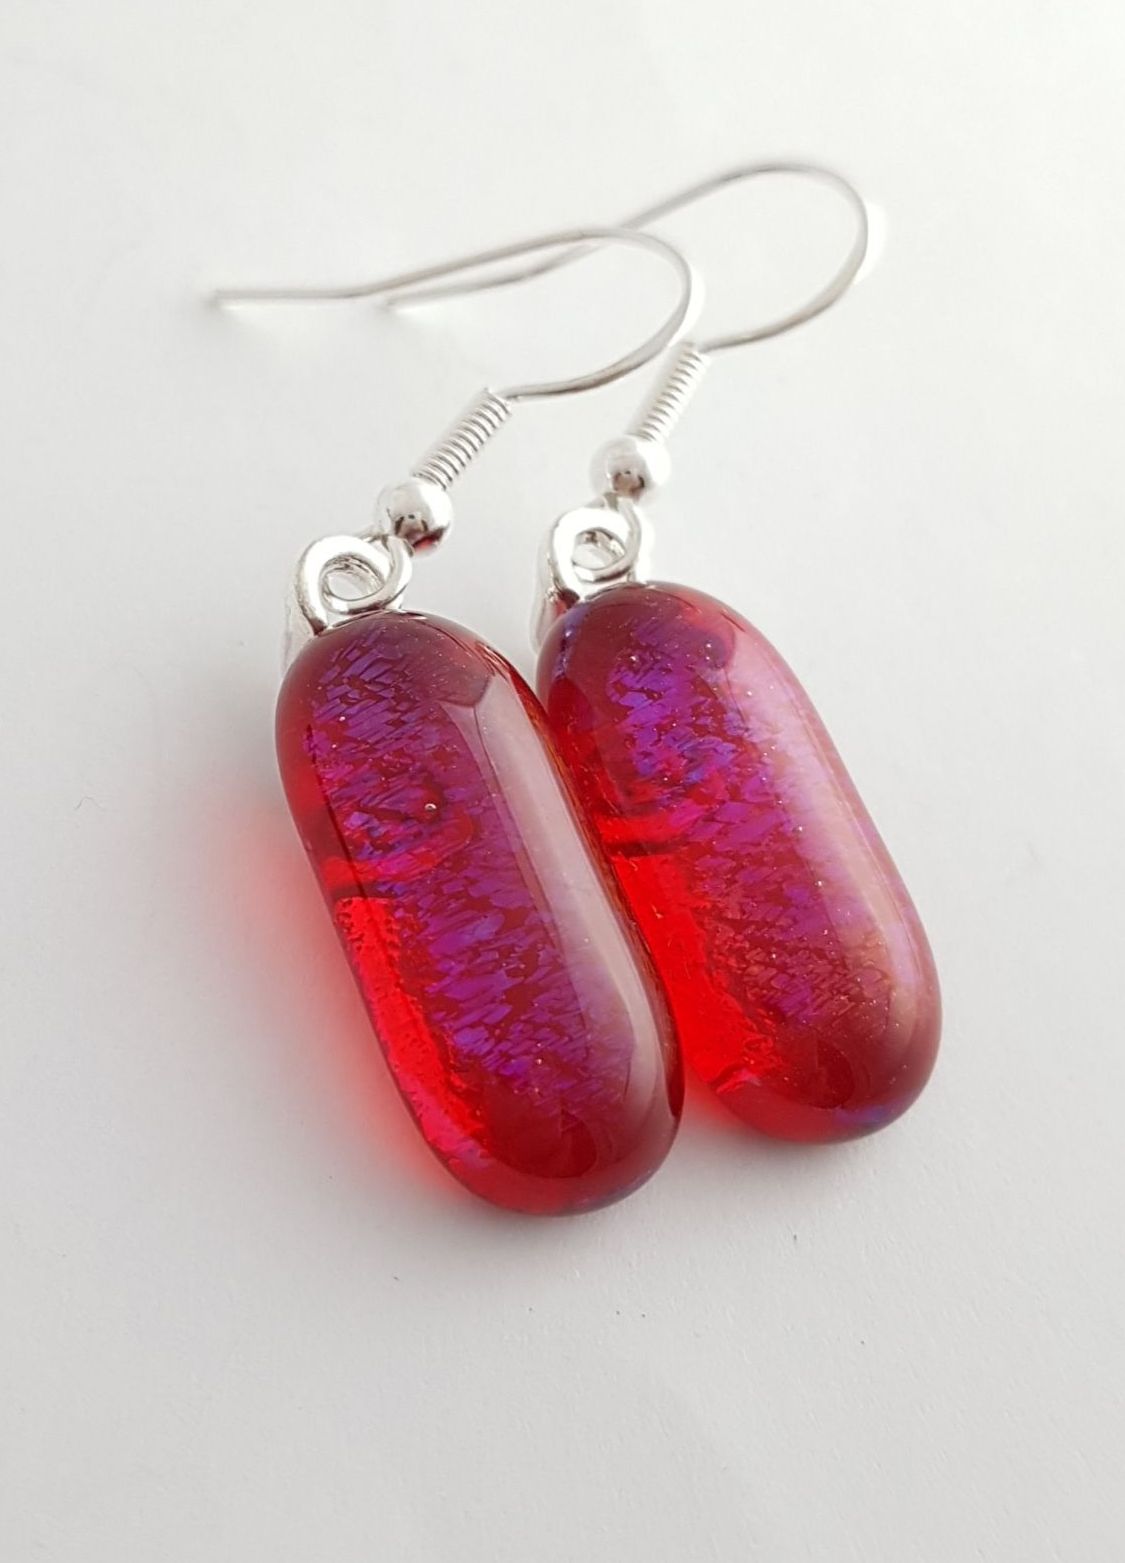 Iridescent red glass earrings with blue shimmer inside